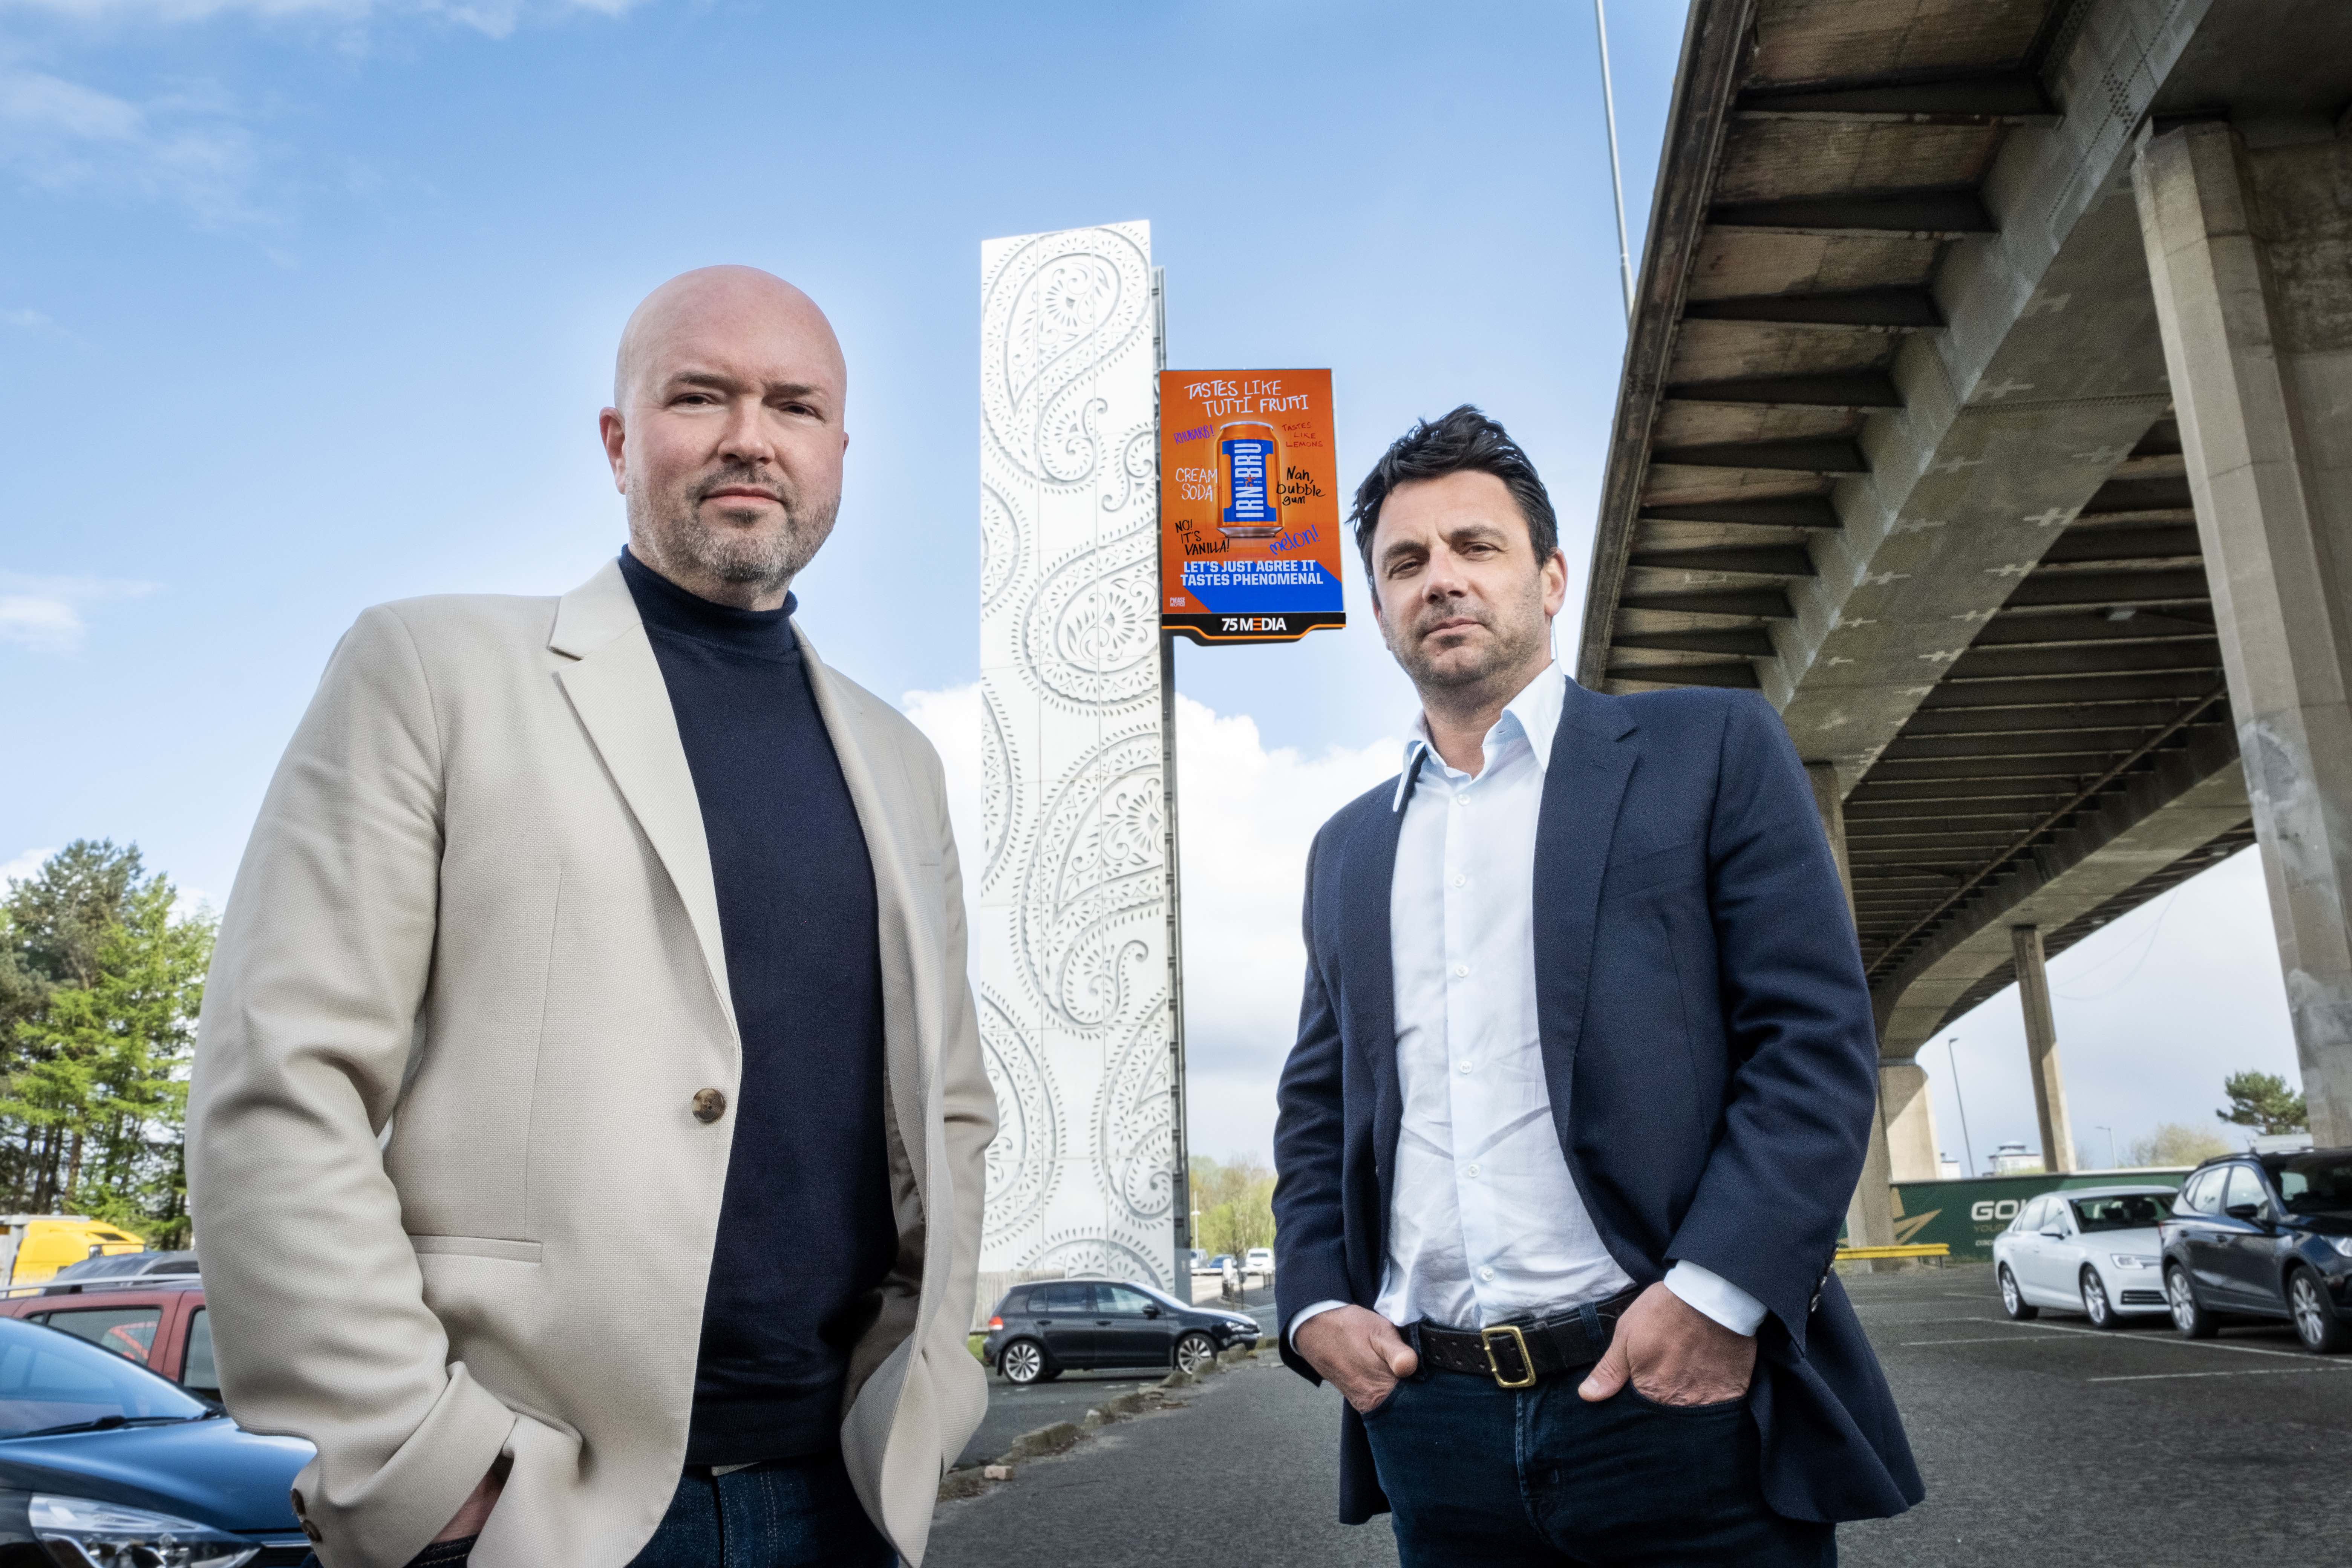  (L) Paul Inman, managing director of 75Media and Damian Cox, CEO of Wildstone, at 75Media's new landmark OOH site, the M8 Tower, Glasgow, Scotland